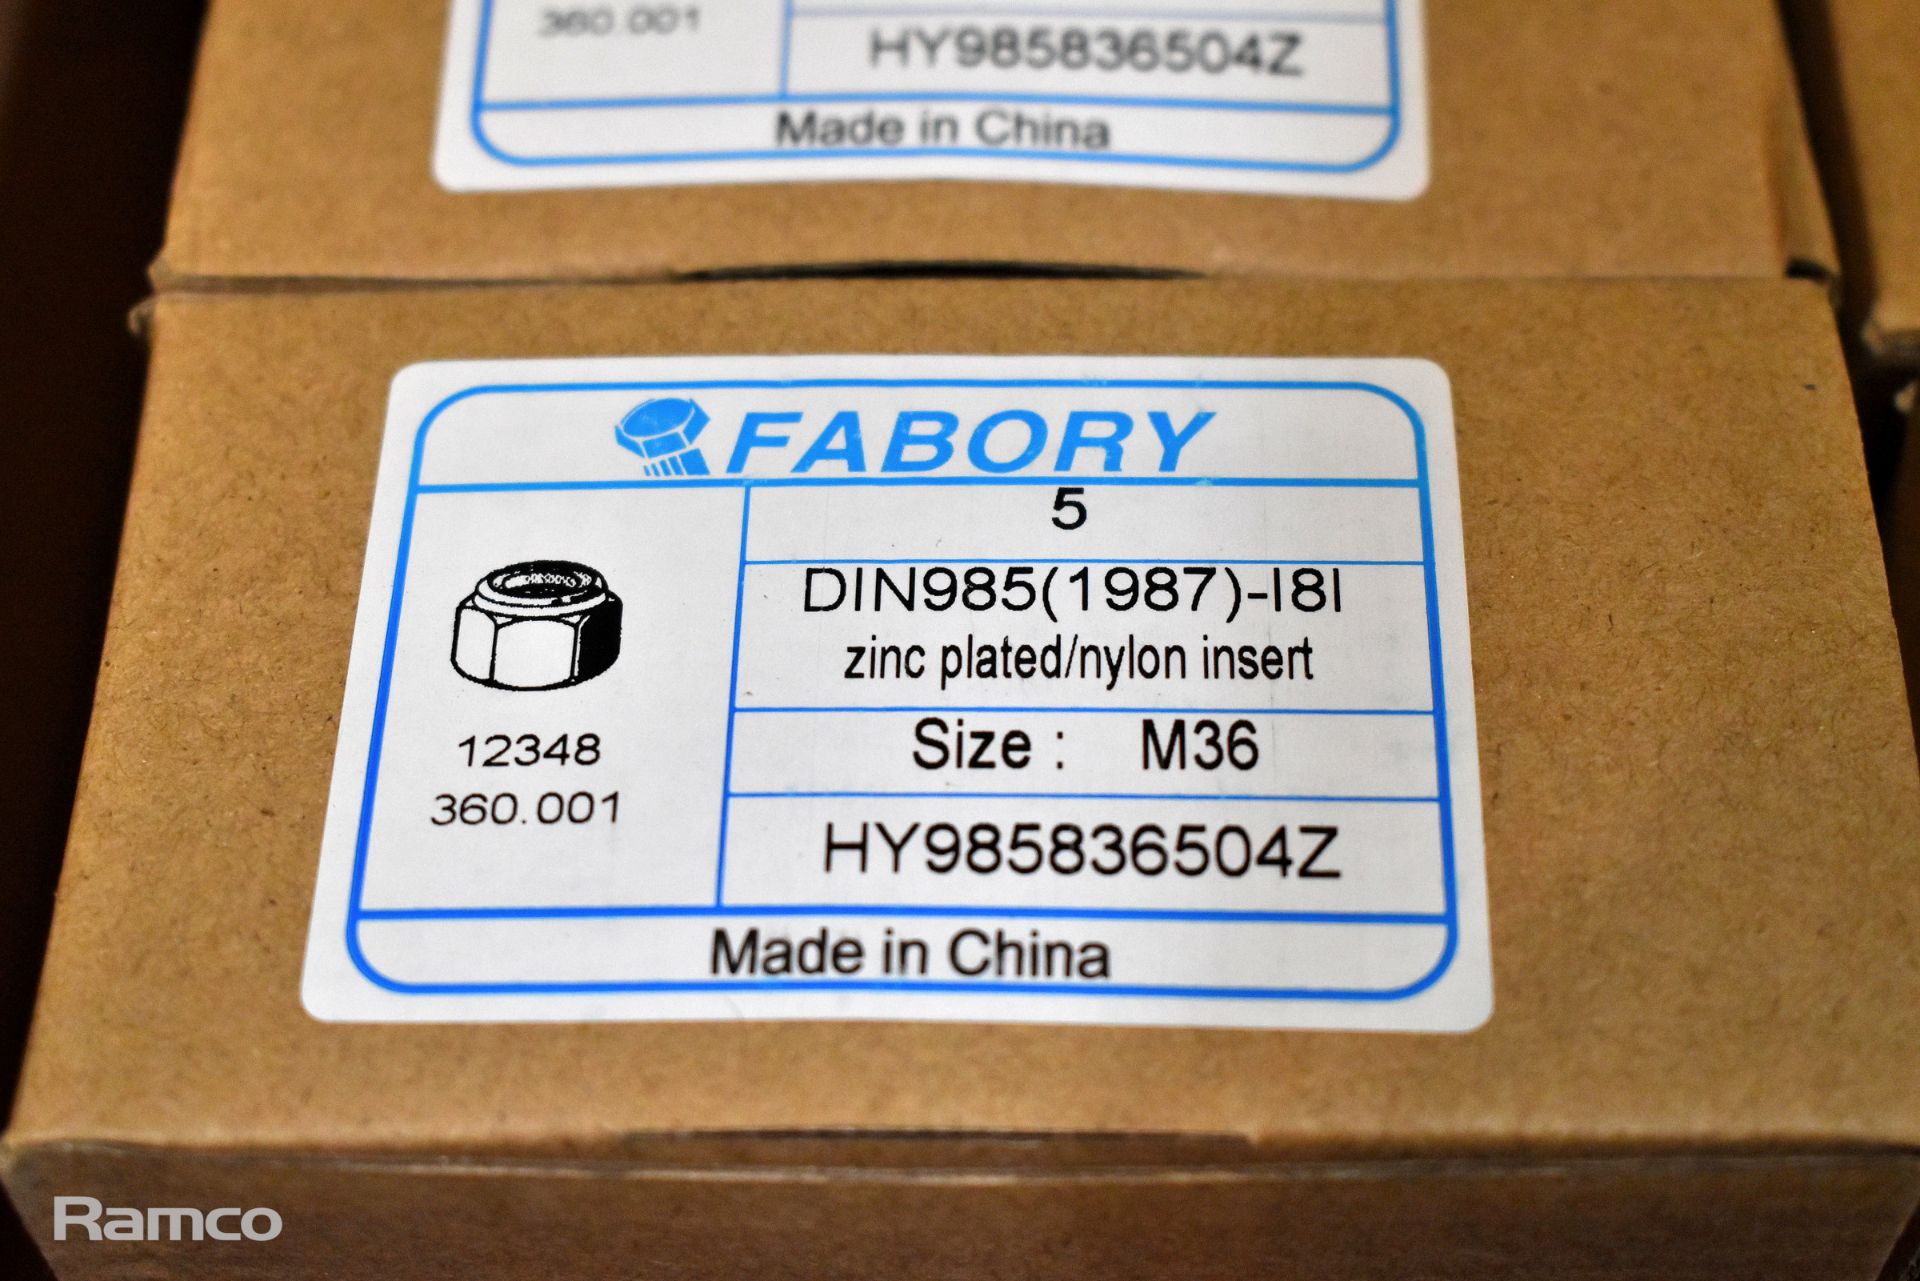 Fabory 36 mm nylon insert locking nuts - 1 box - 6 packs - 5 nuts per pack - Image 2 of 2